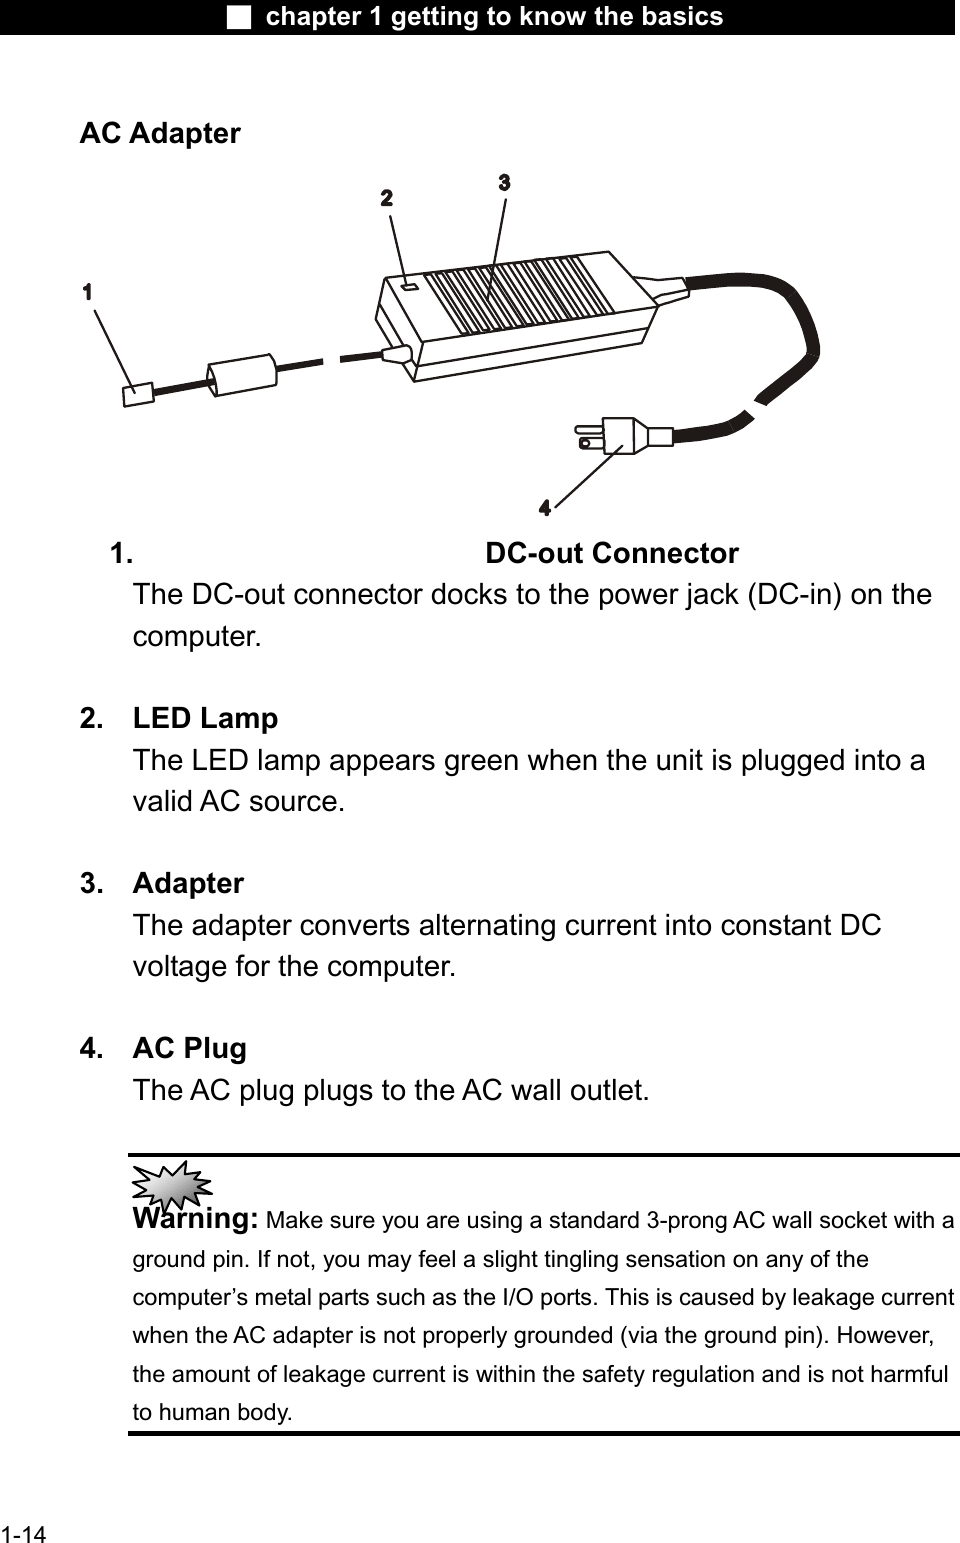 Ϯ chapter 1 getting to know the basicsAC Adapter1. DC-out ConnectorThe DC-out connector docks to the power jack (DC-in) on the computer.2. LED LampThe LED lamp appears green when the unit is plugged into a valid AC source.3. AdapterThe adapter converts alternating current into constant DC voltage for the computer.4. AC PlugThe AC plug plugs to the AC wall outlet.Warning: Make sure you are using a standard 3-prong AC wall socket with aground pin. If not, you may feel a slight tingling sensation on any of thecomputer’s metal parts such as the I/O ports. This is caused by leakage currentwhen the AC adapter is not properly grounded (via the ground pin). However,the amount of leakage current is within the safety regulation and is not harmful to human body.1-14